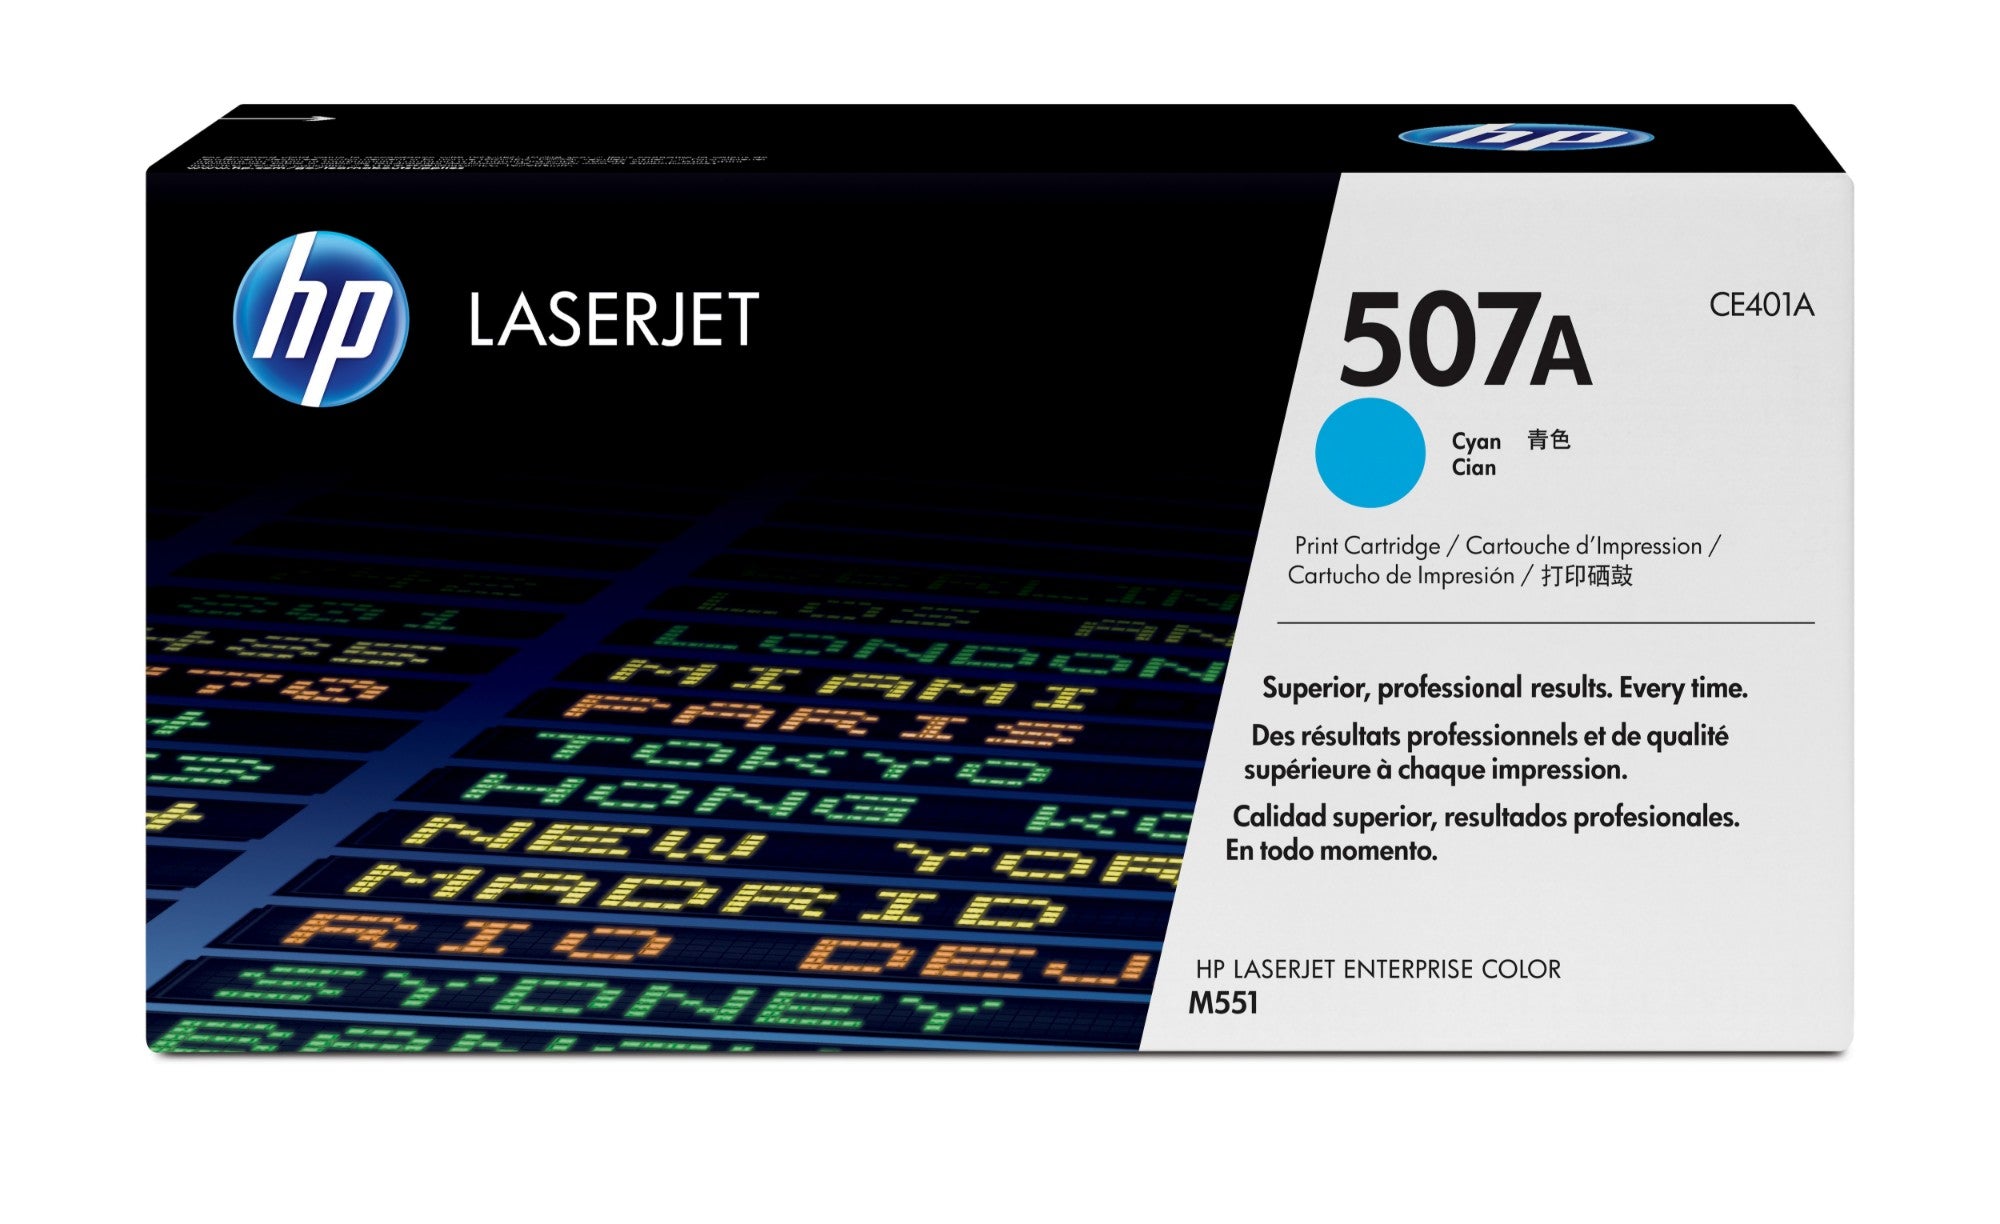 HP CE401A/507A Toner cartridge cyan, 6K pages ISO/IEC 19798 for HP LaserJet EP 500